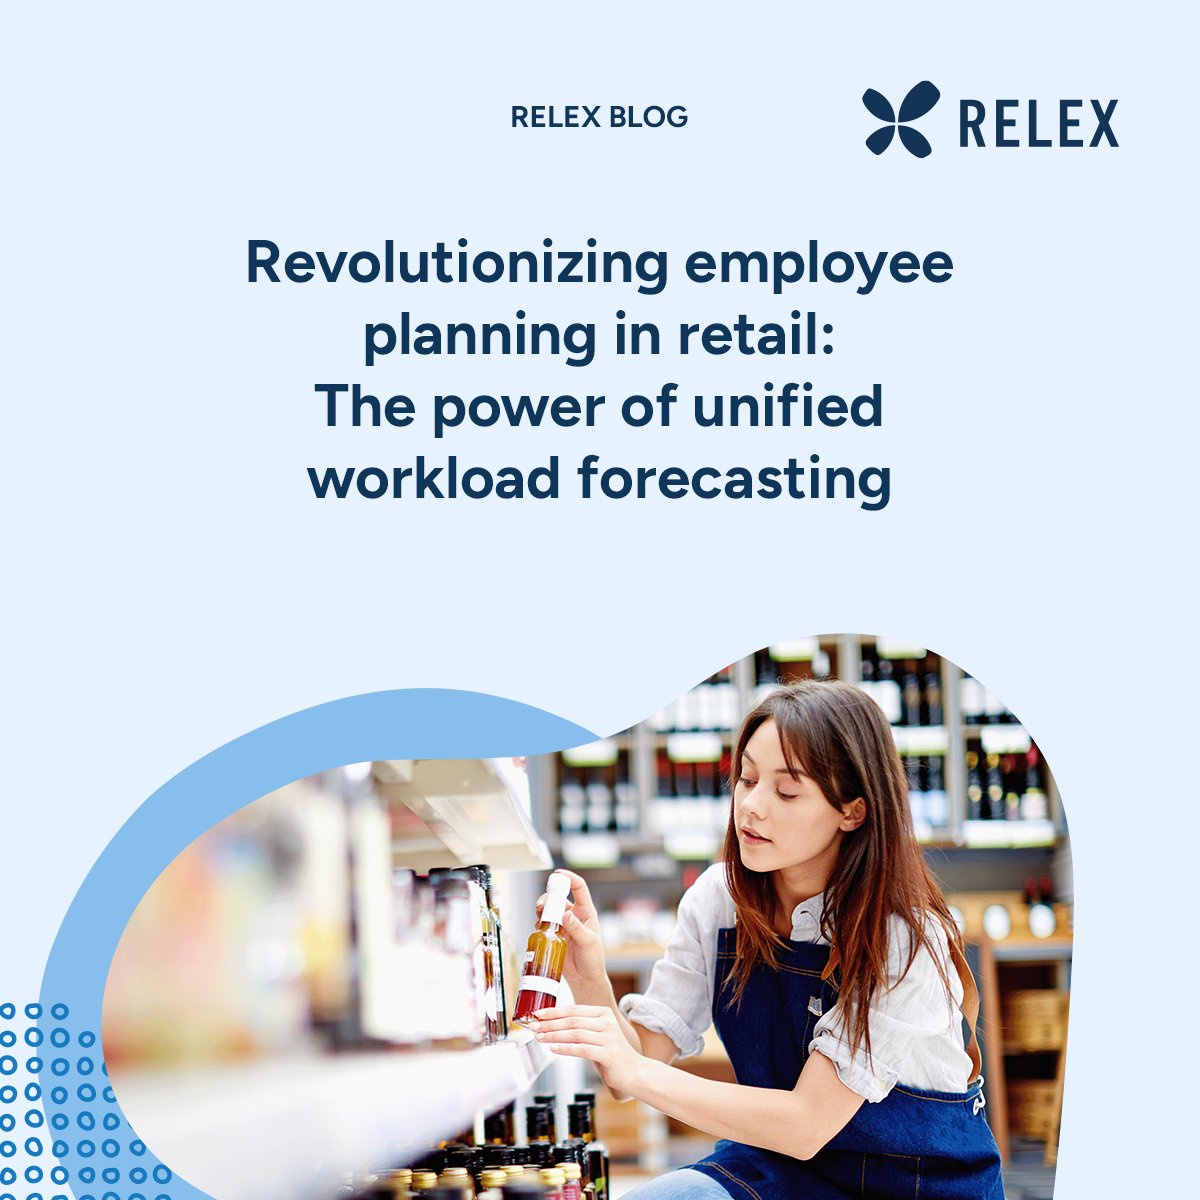 Rethink retail employee planning with unified workload forecasting. Our latest blog dives into optimizing workforce allocation for better profitability and customer satisfaction. 🛒💼 Discover how RELEX's solution can transform your planning: relexsolutions.com/resources/revo…